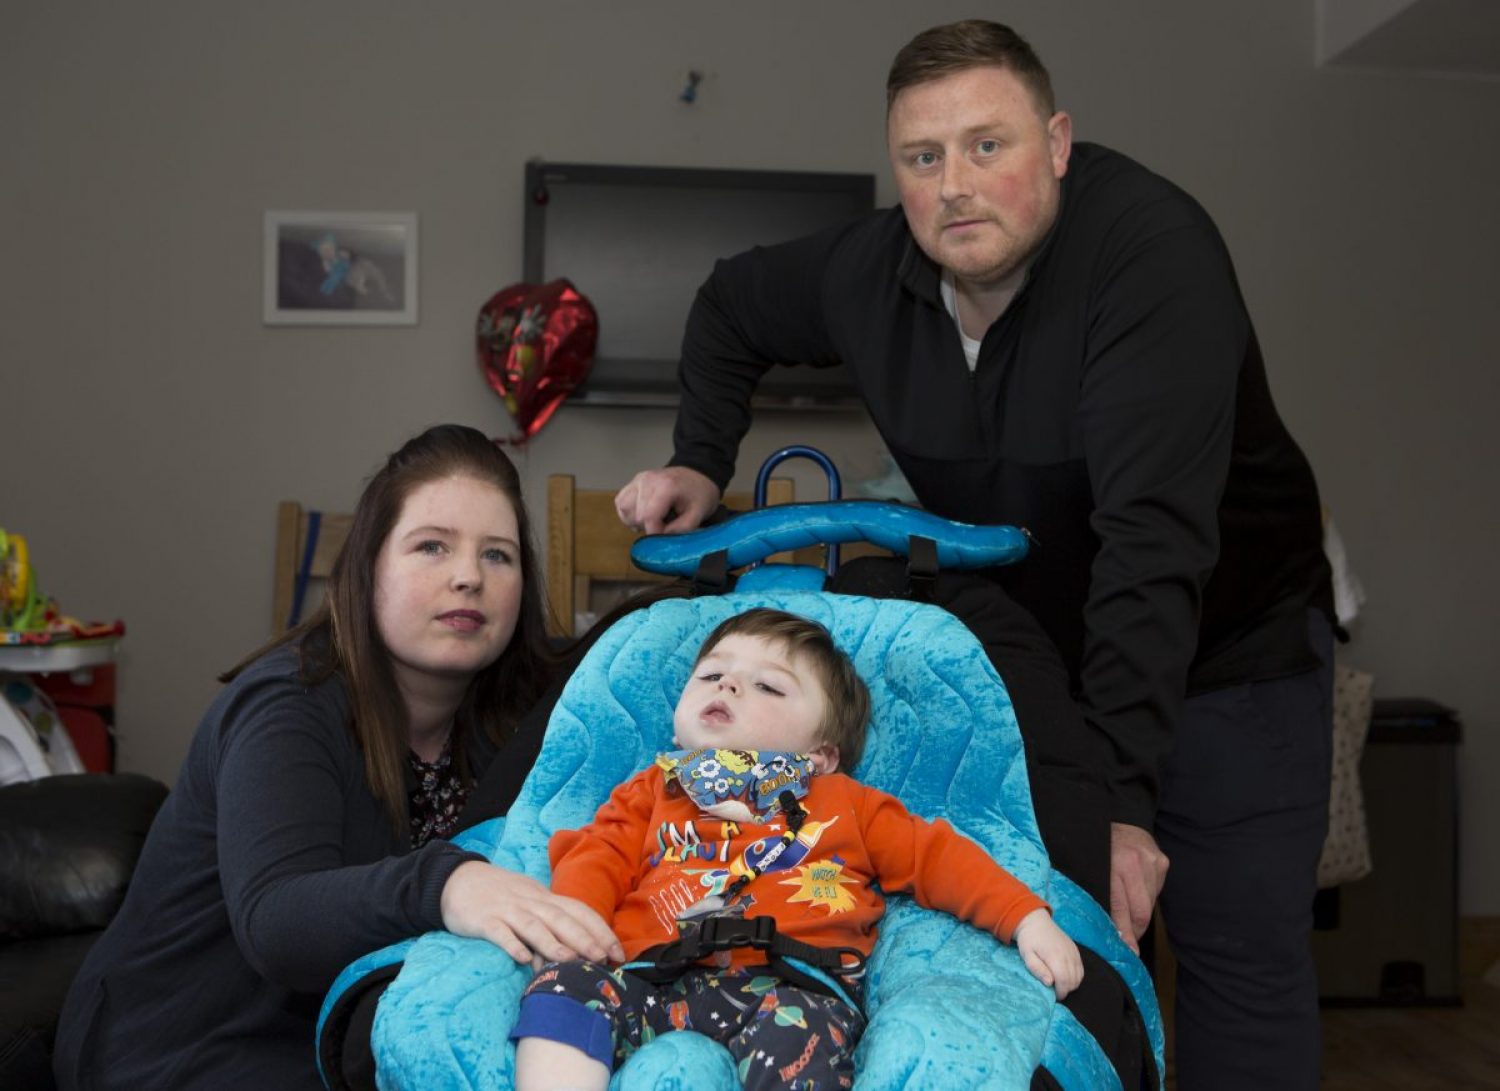 Fight For Fionn Christmas Appeal